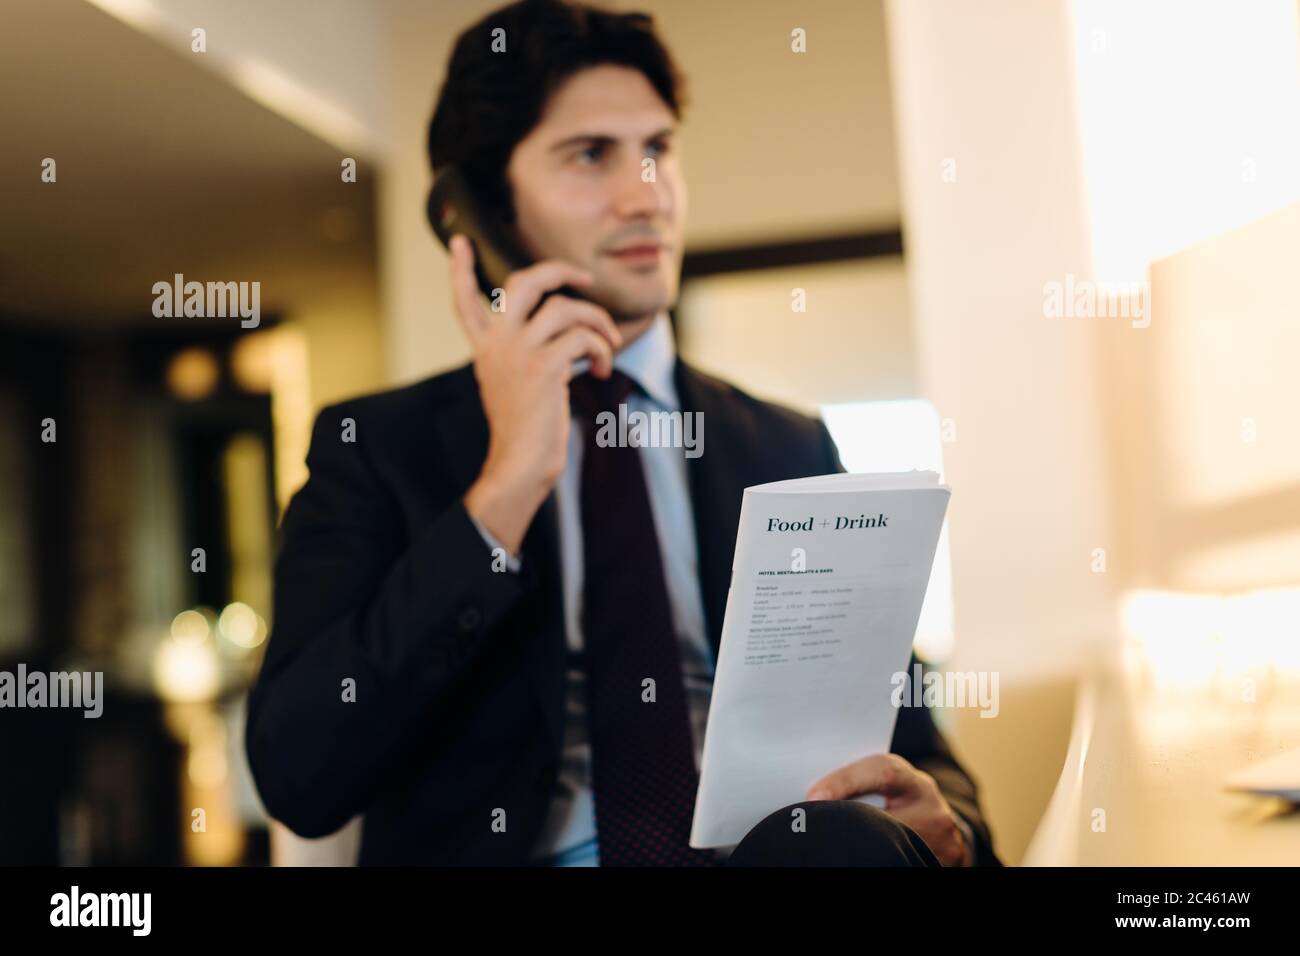 Businessman ordering room service in hotel Stock Photo